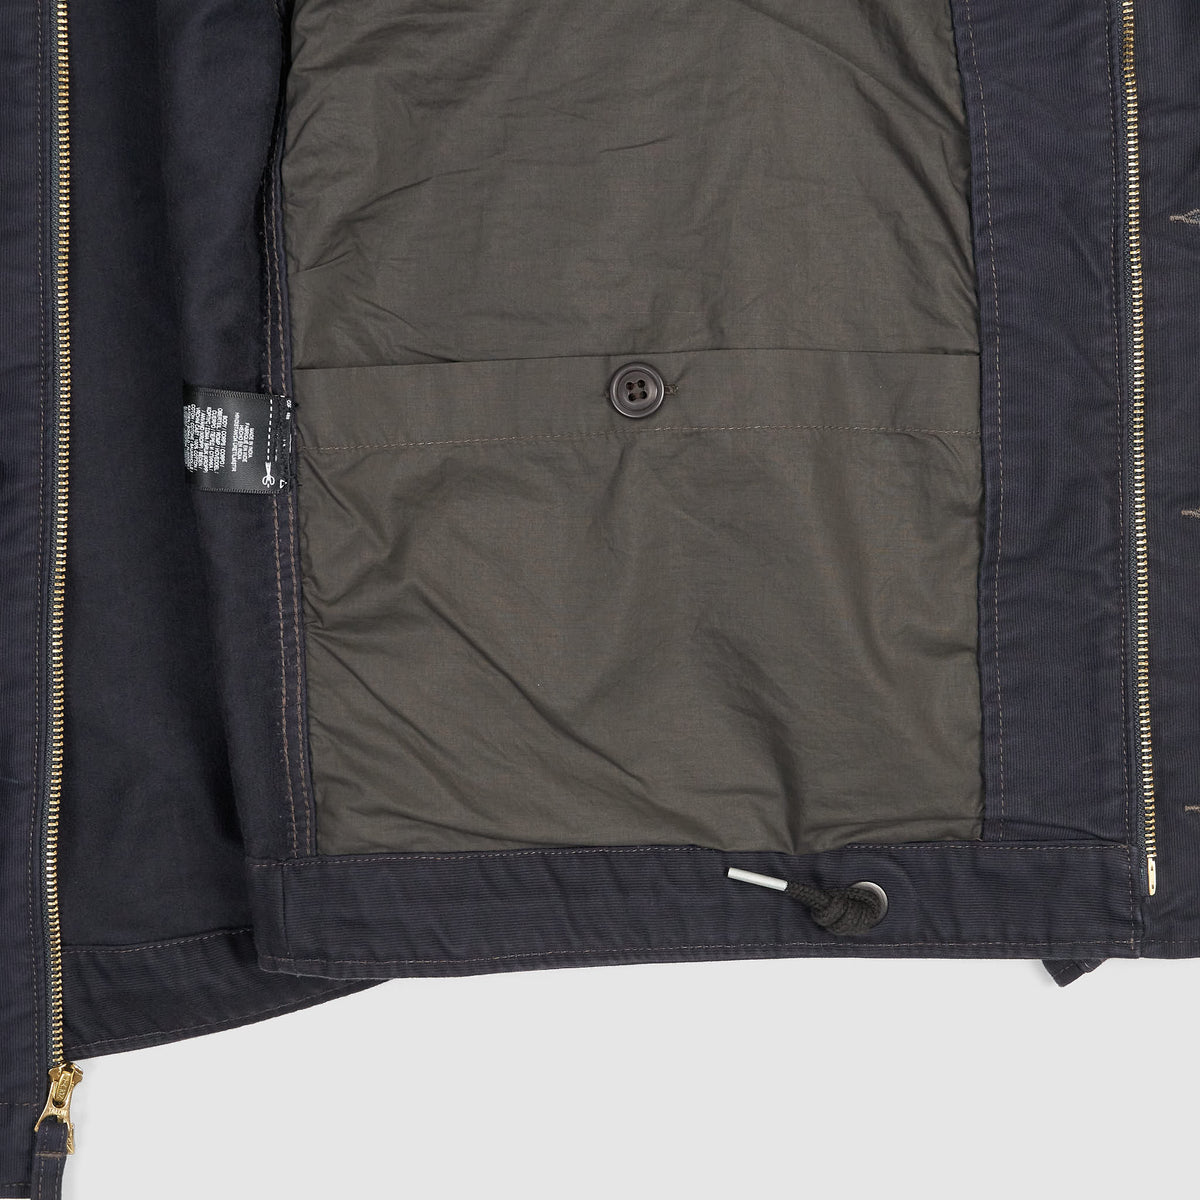 Double RL Type N-1 Deck Jacket With Cord Collar